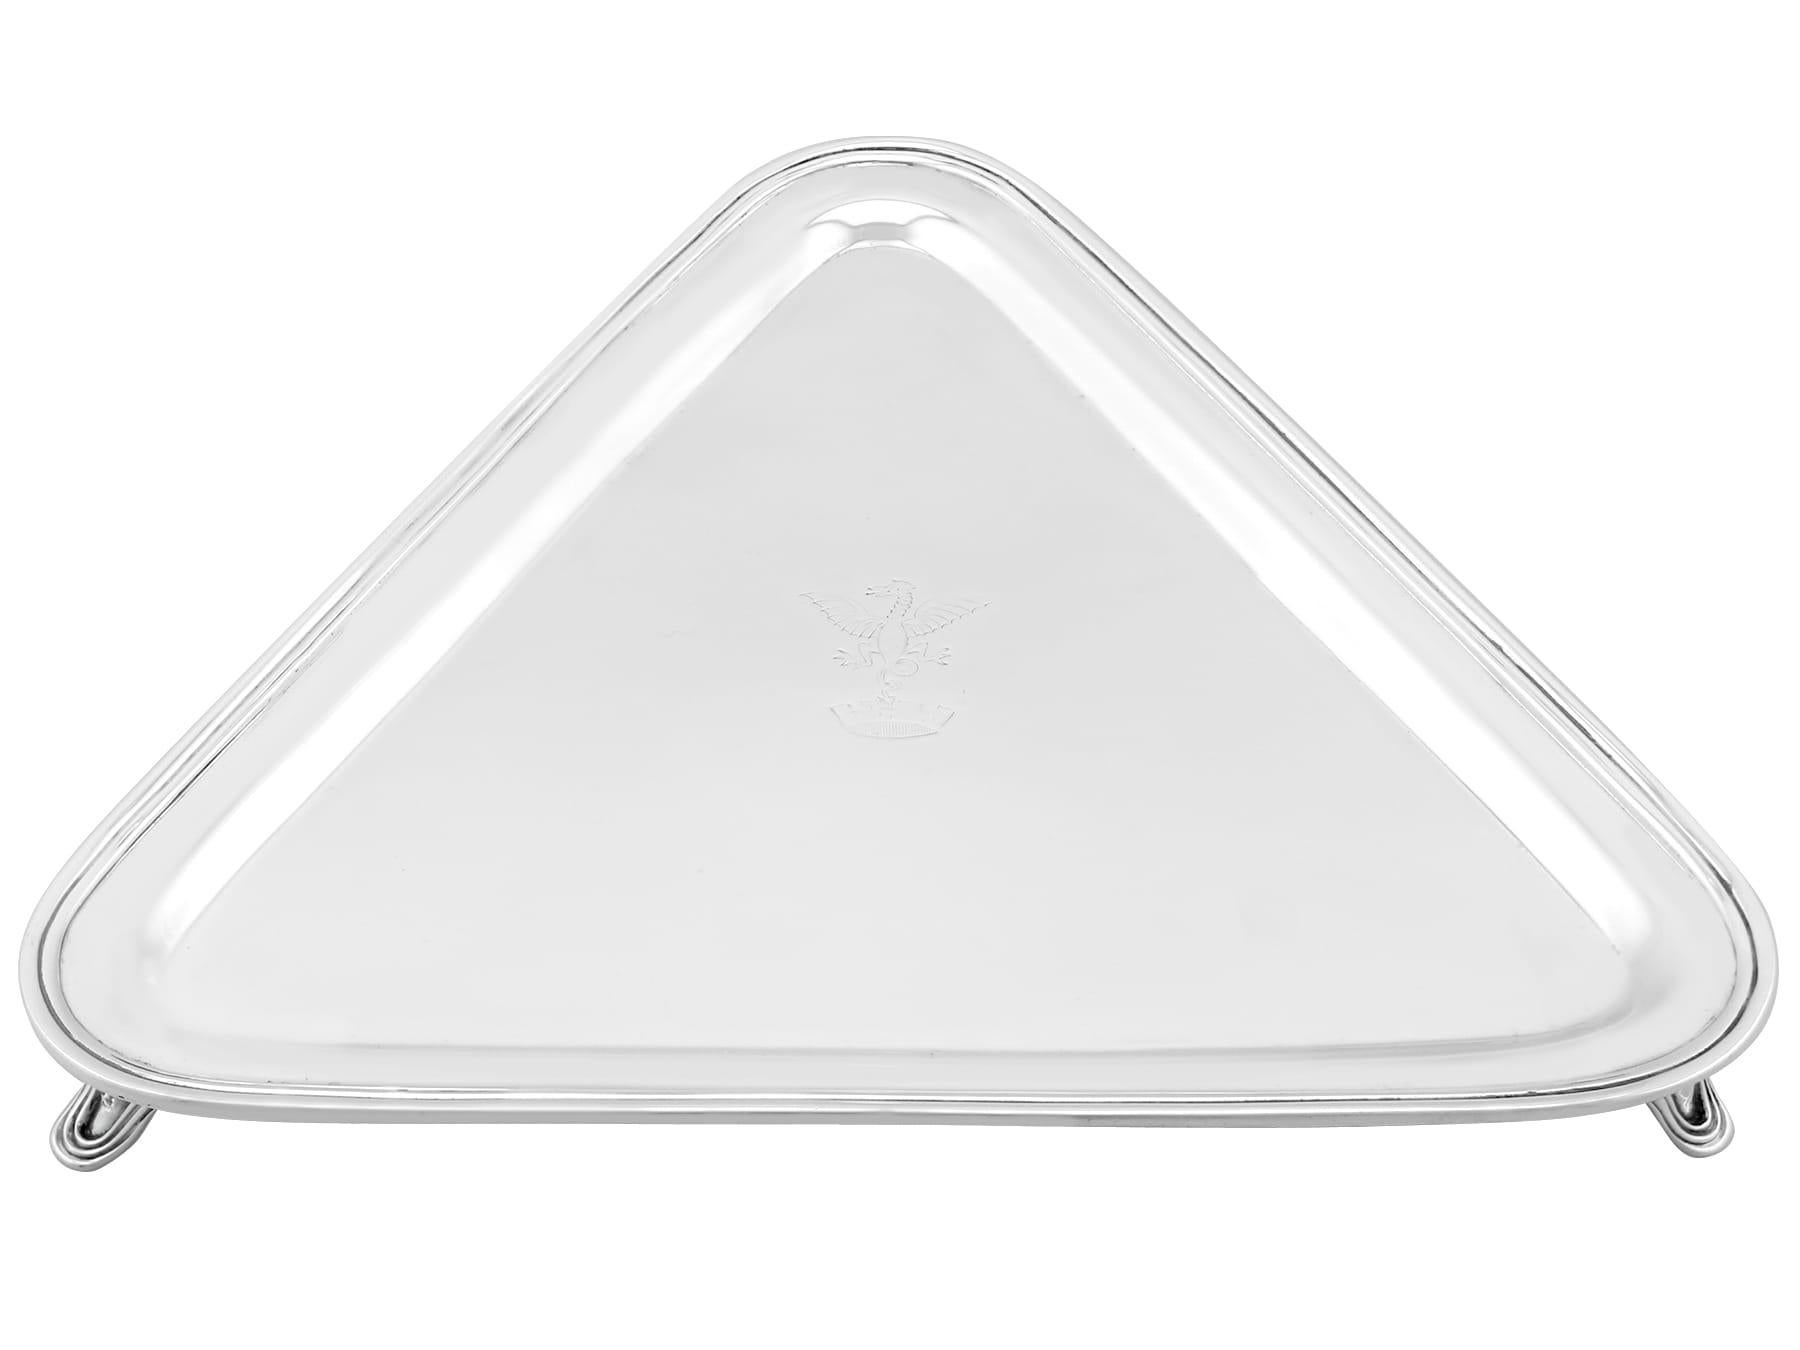 An exceptional, fine and impressive antique Edwardian English sterling silver triangular salver; part of our dining silverware collection

This exceptional antique Edwardian sterling silver salver has a plain triangular form.

The surface of